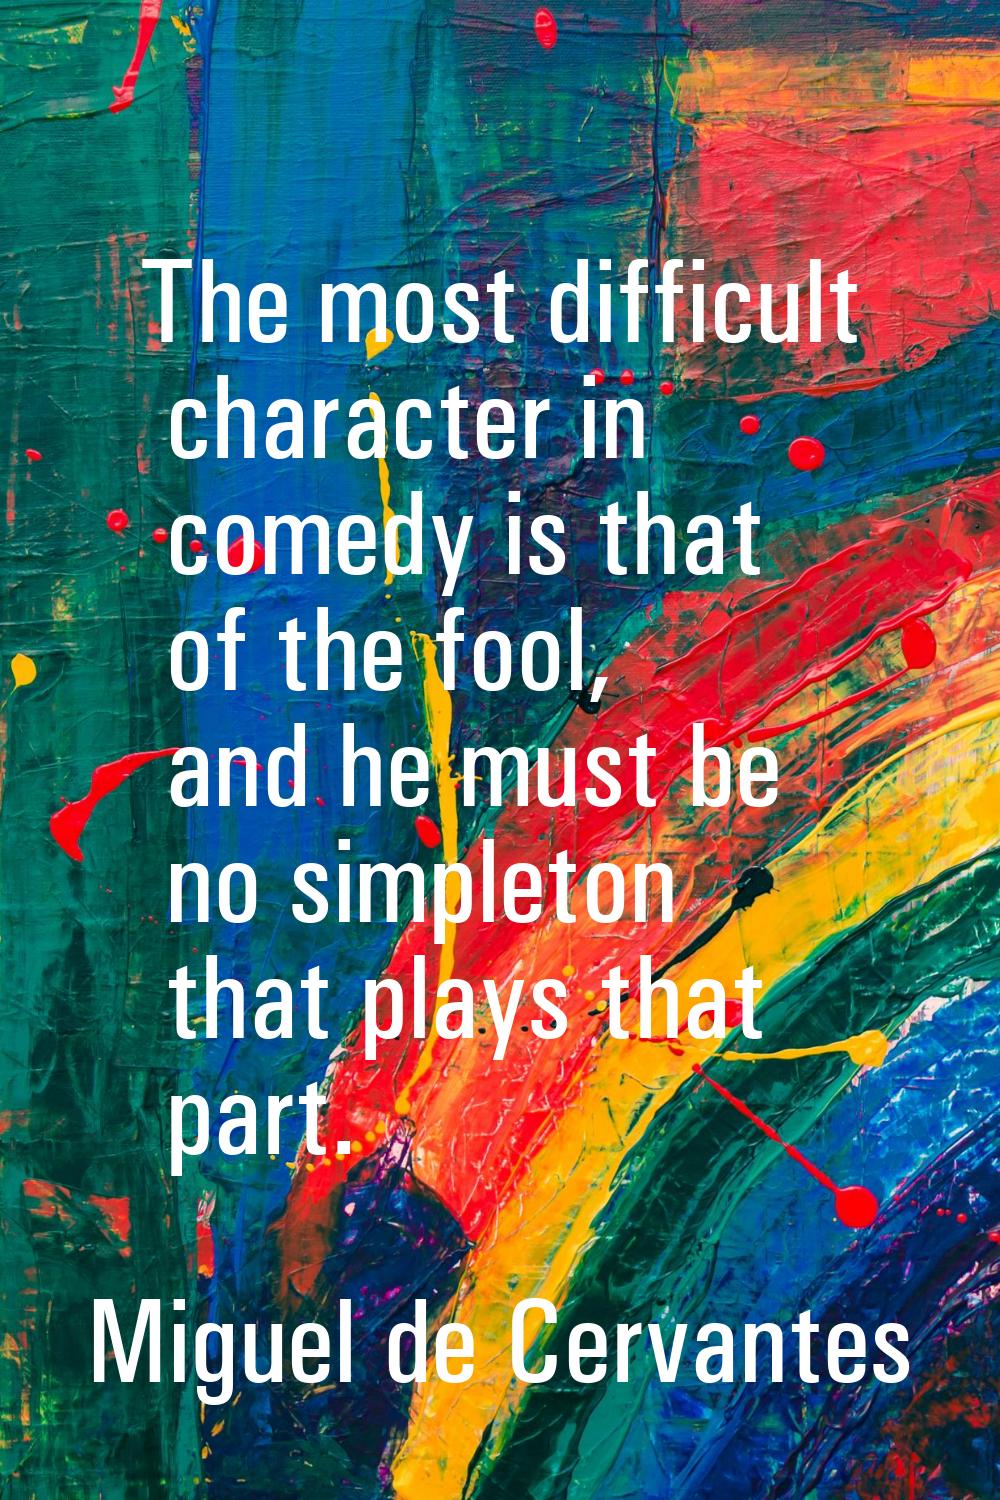 The most difficult character in comedy is that of the fool, and he must be no simpleton that plays 